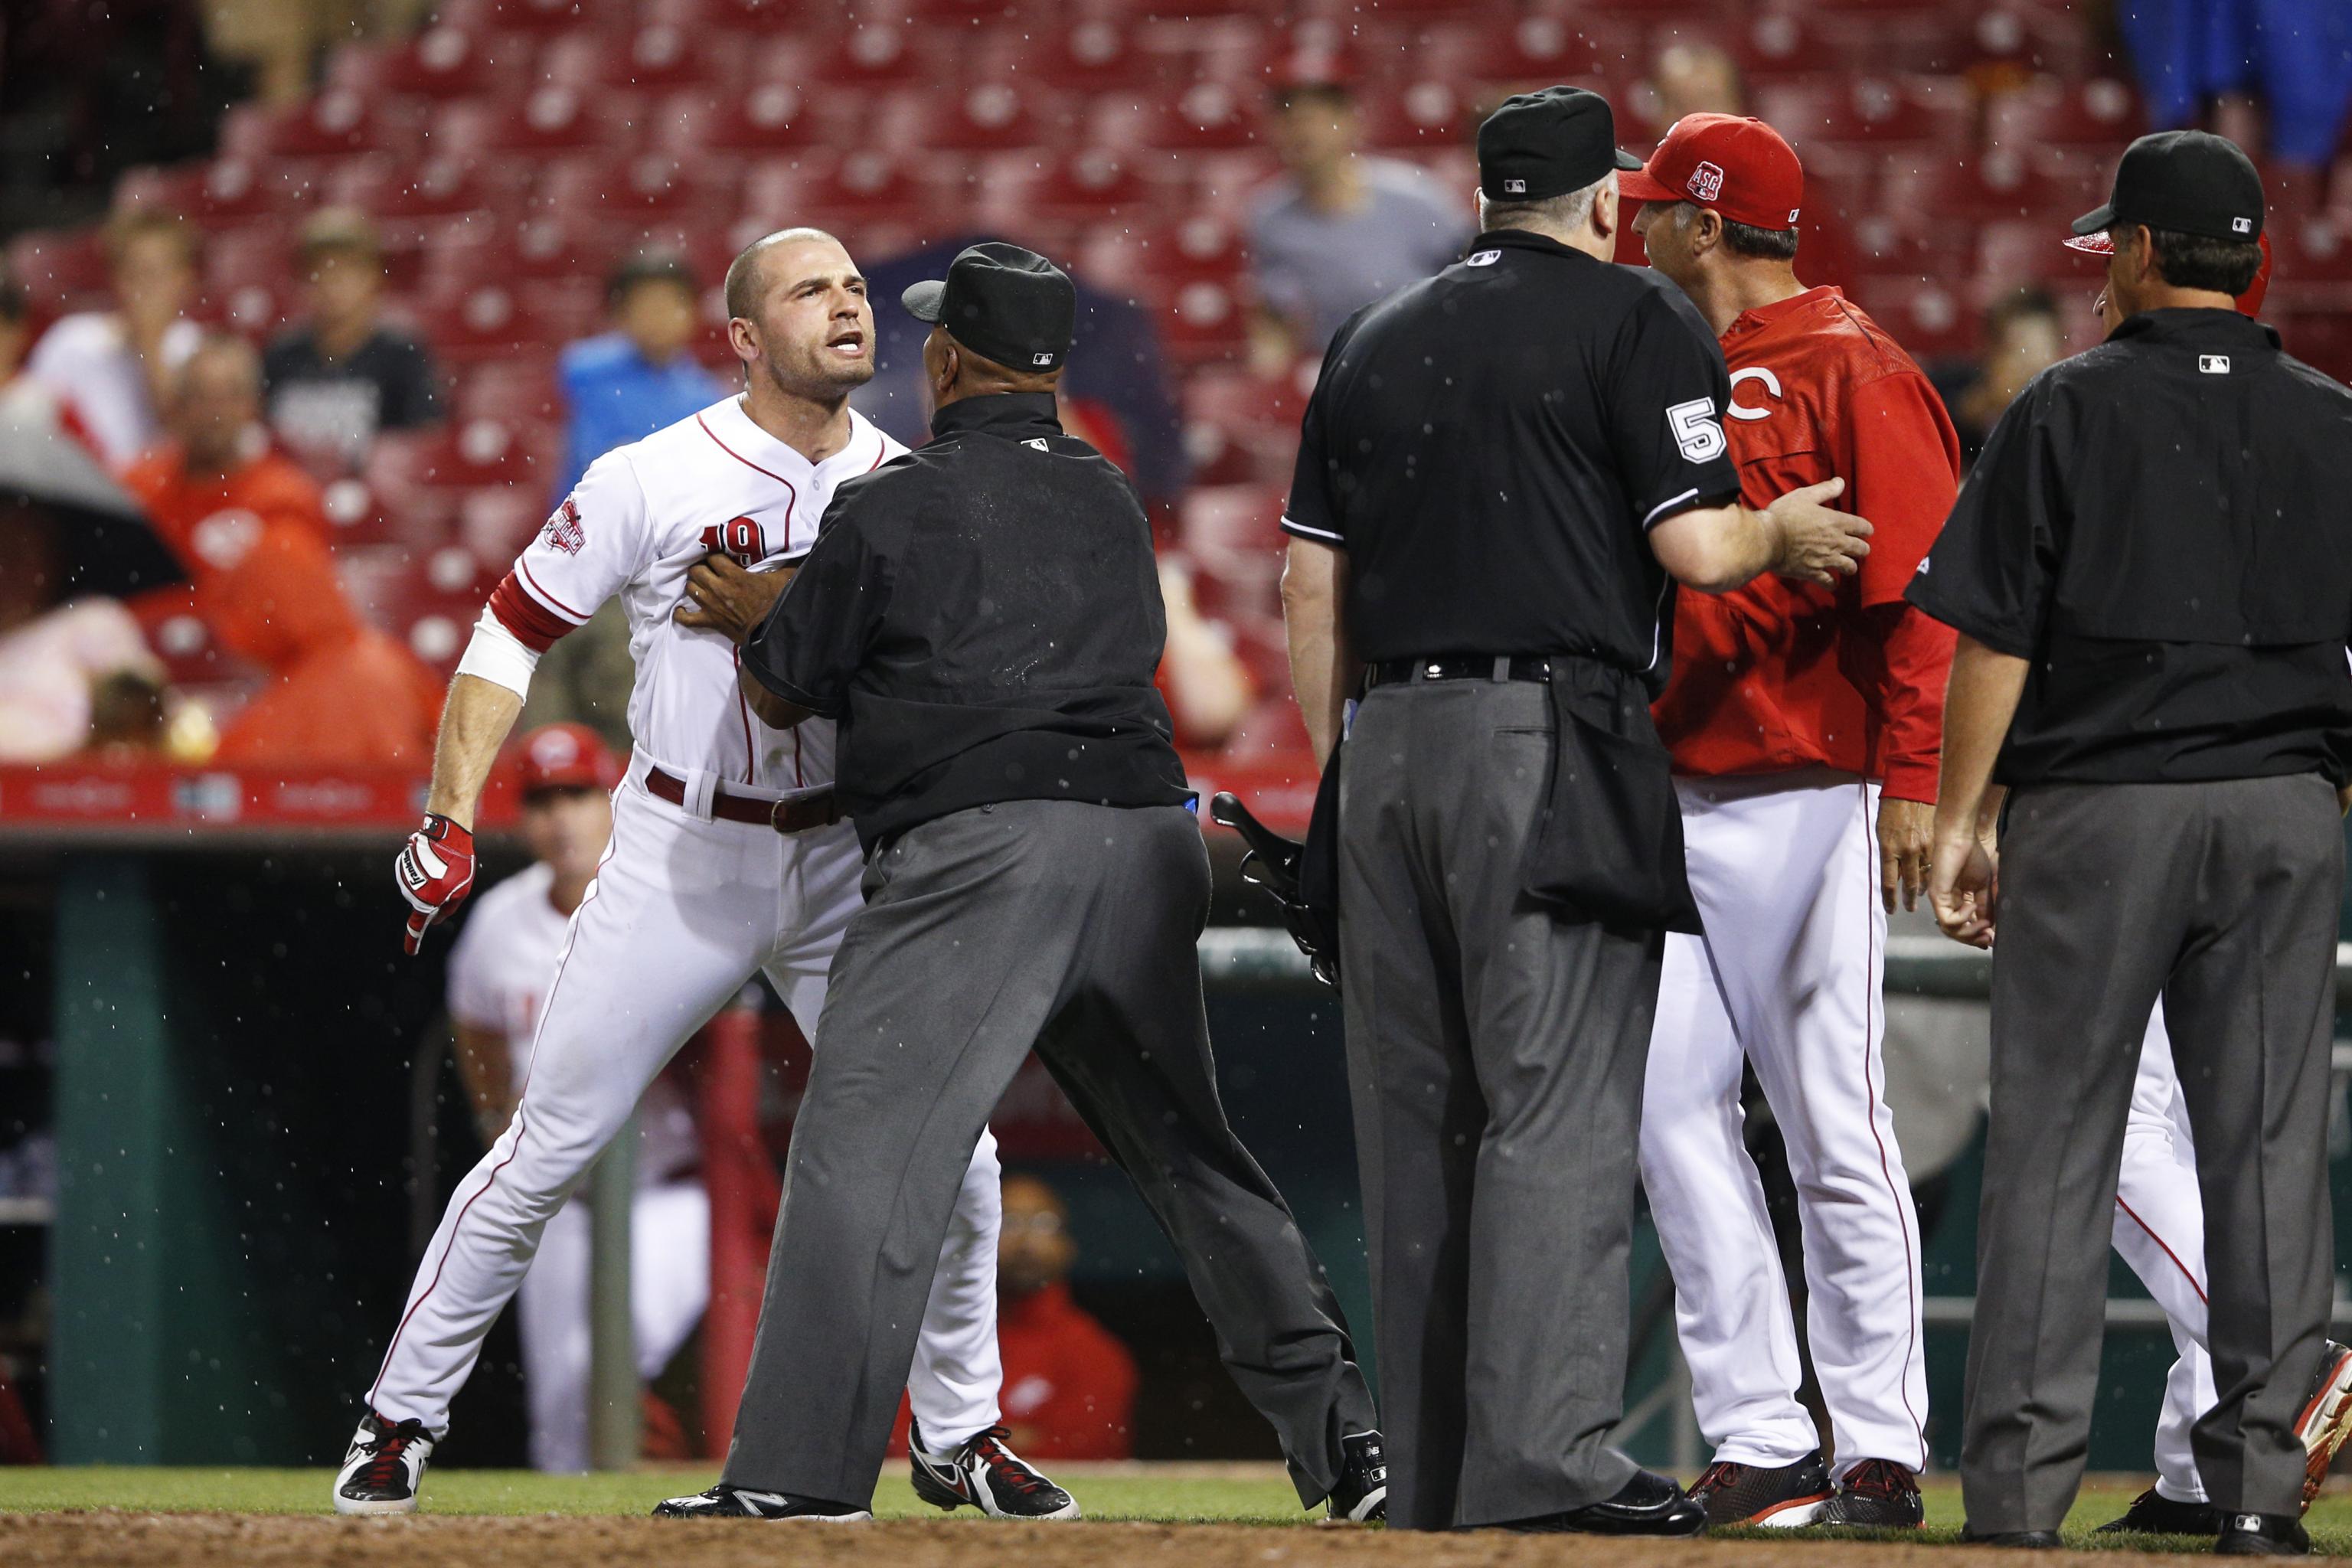 Votto ejected: Reds first baseman thrown out in St. Louis in final